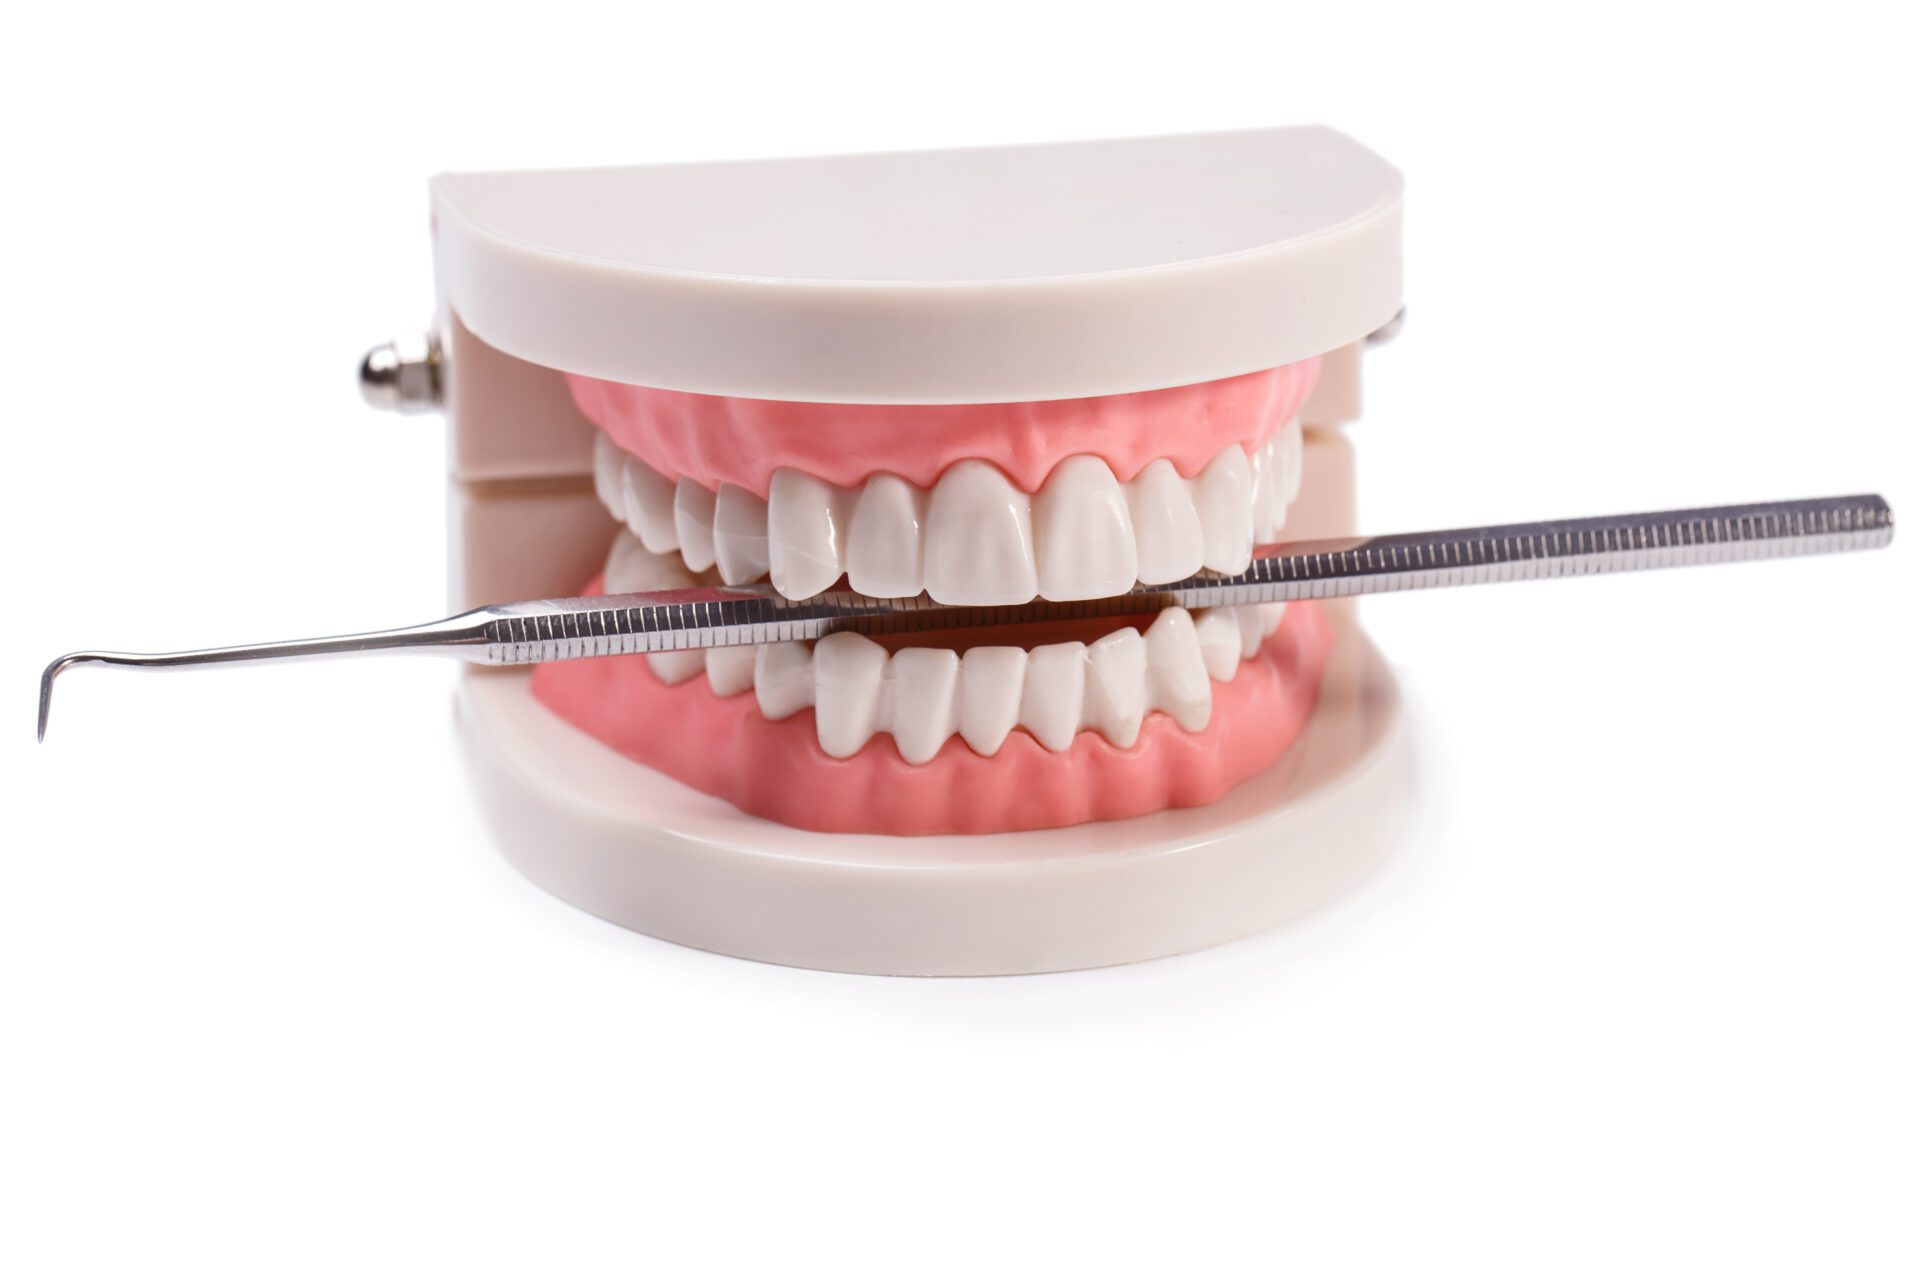 Emergency dental care in Madison, AL including tooth extractions